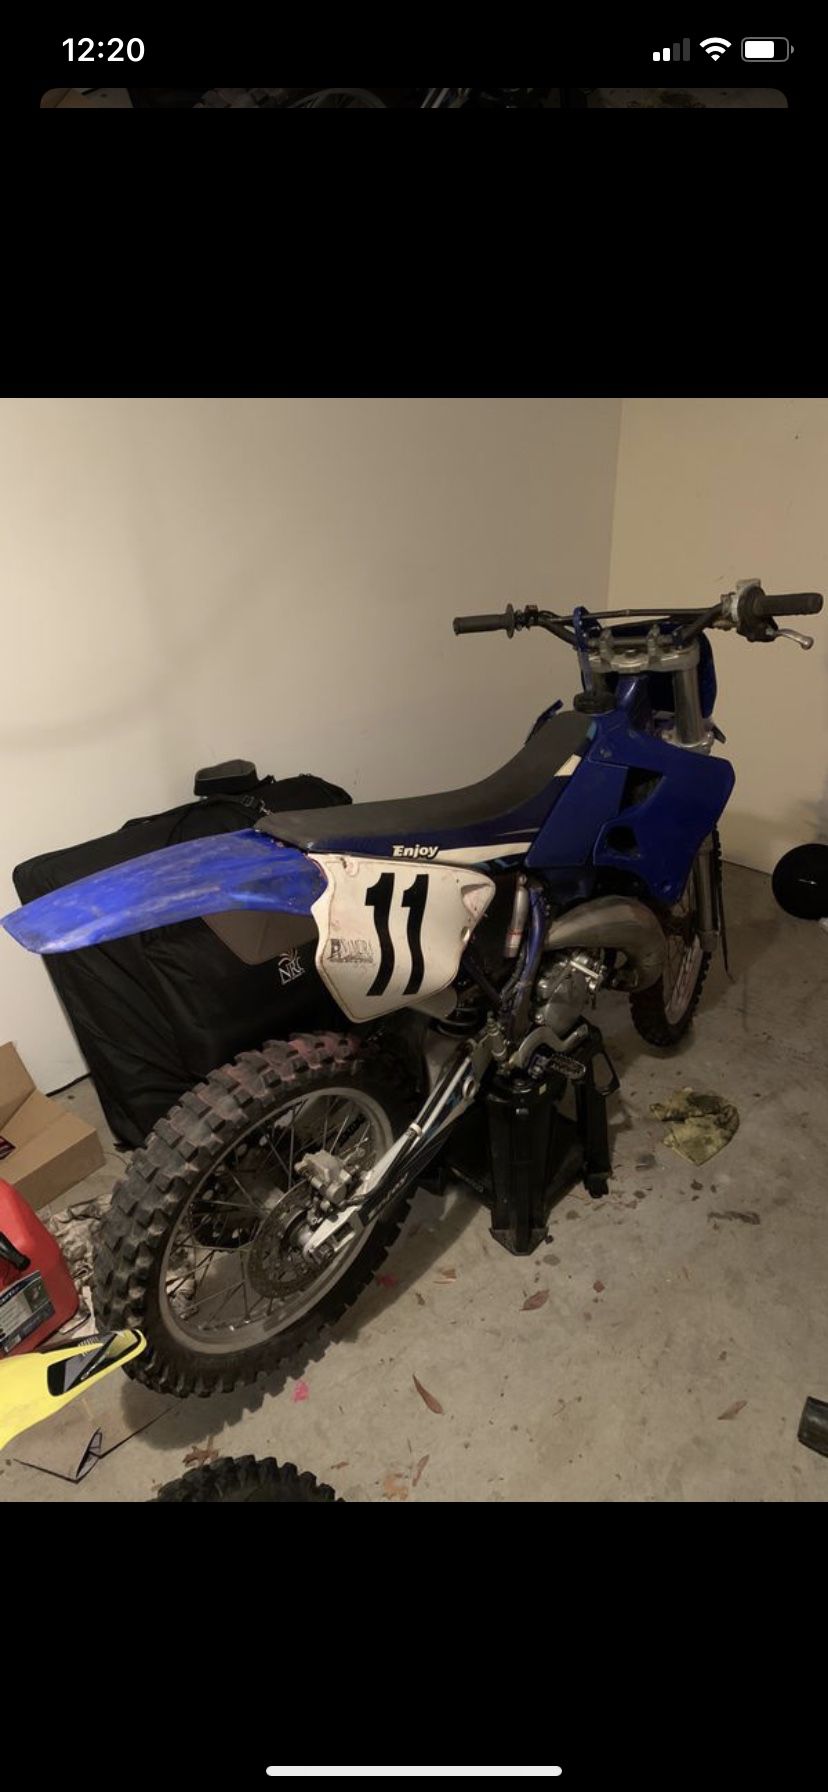 Yamaha yz 125 also looking for project bikes